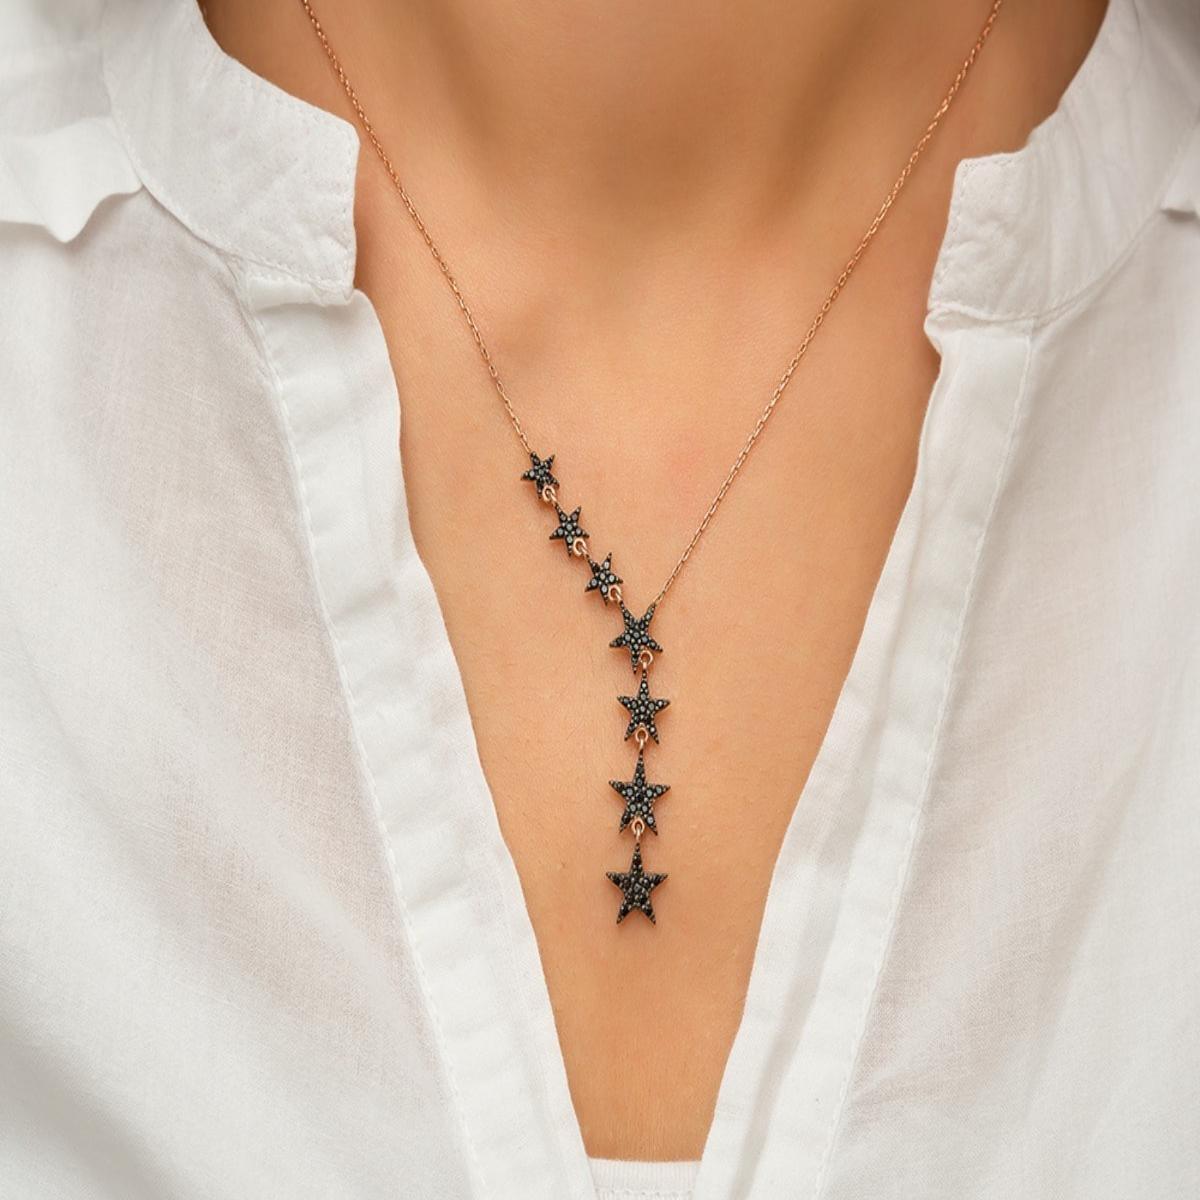 7 Pointed Star Necklace • Black Zirconia Star Necklace • Gift For Her - Trending Silver Gifts